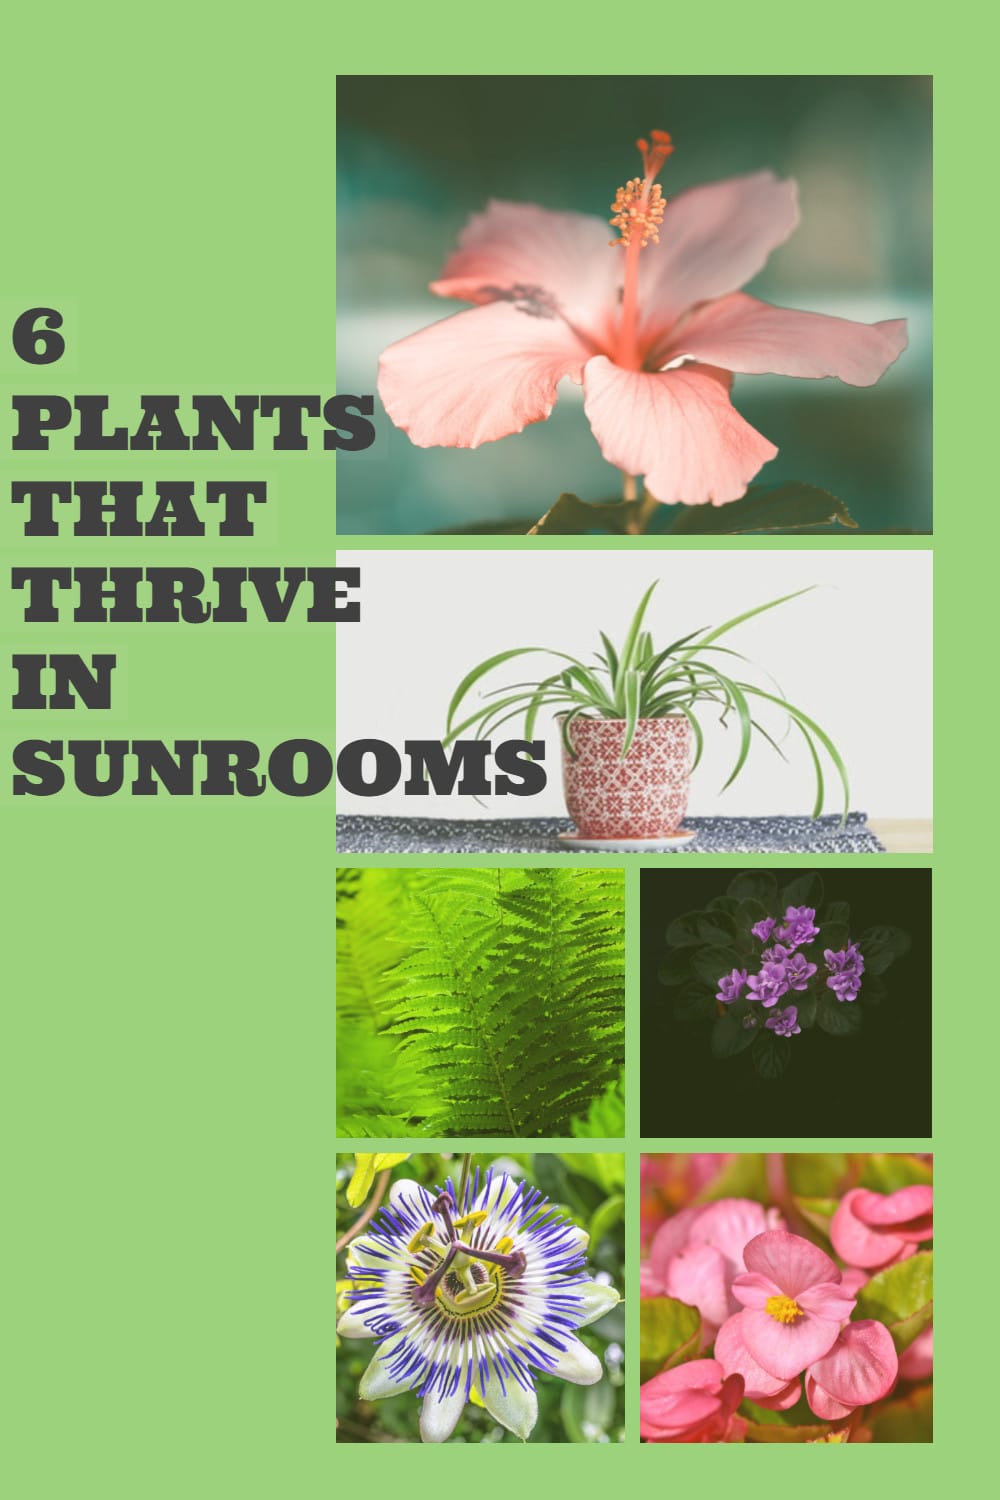 pin showing 6 plants that thrive in sunrooms